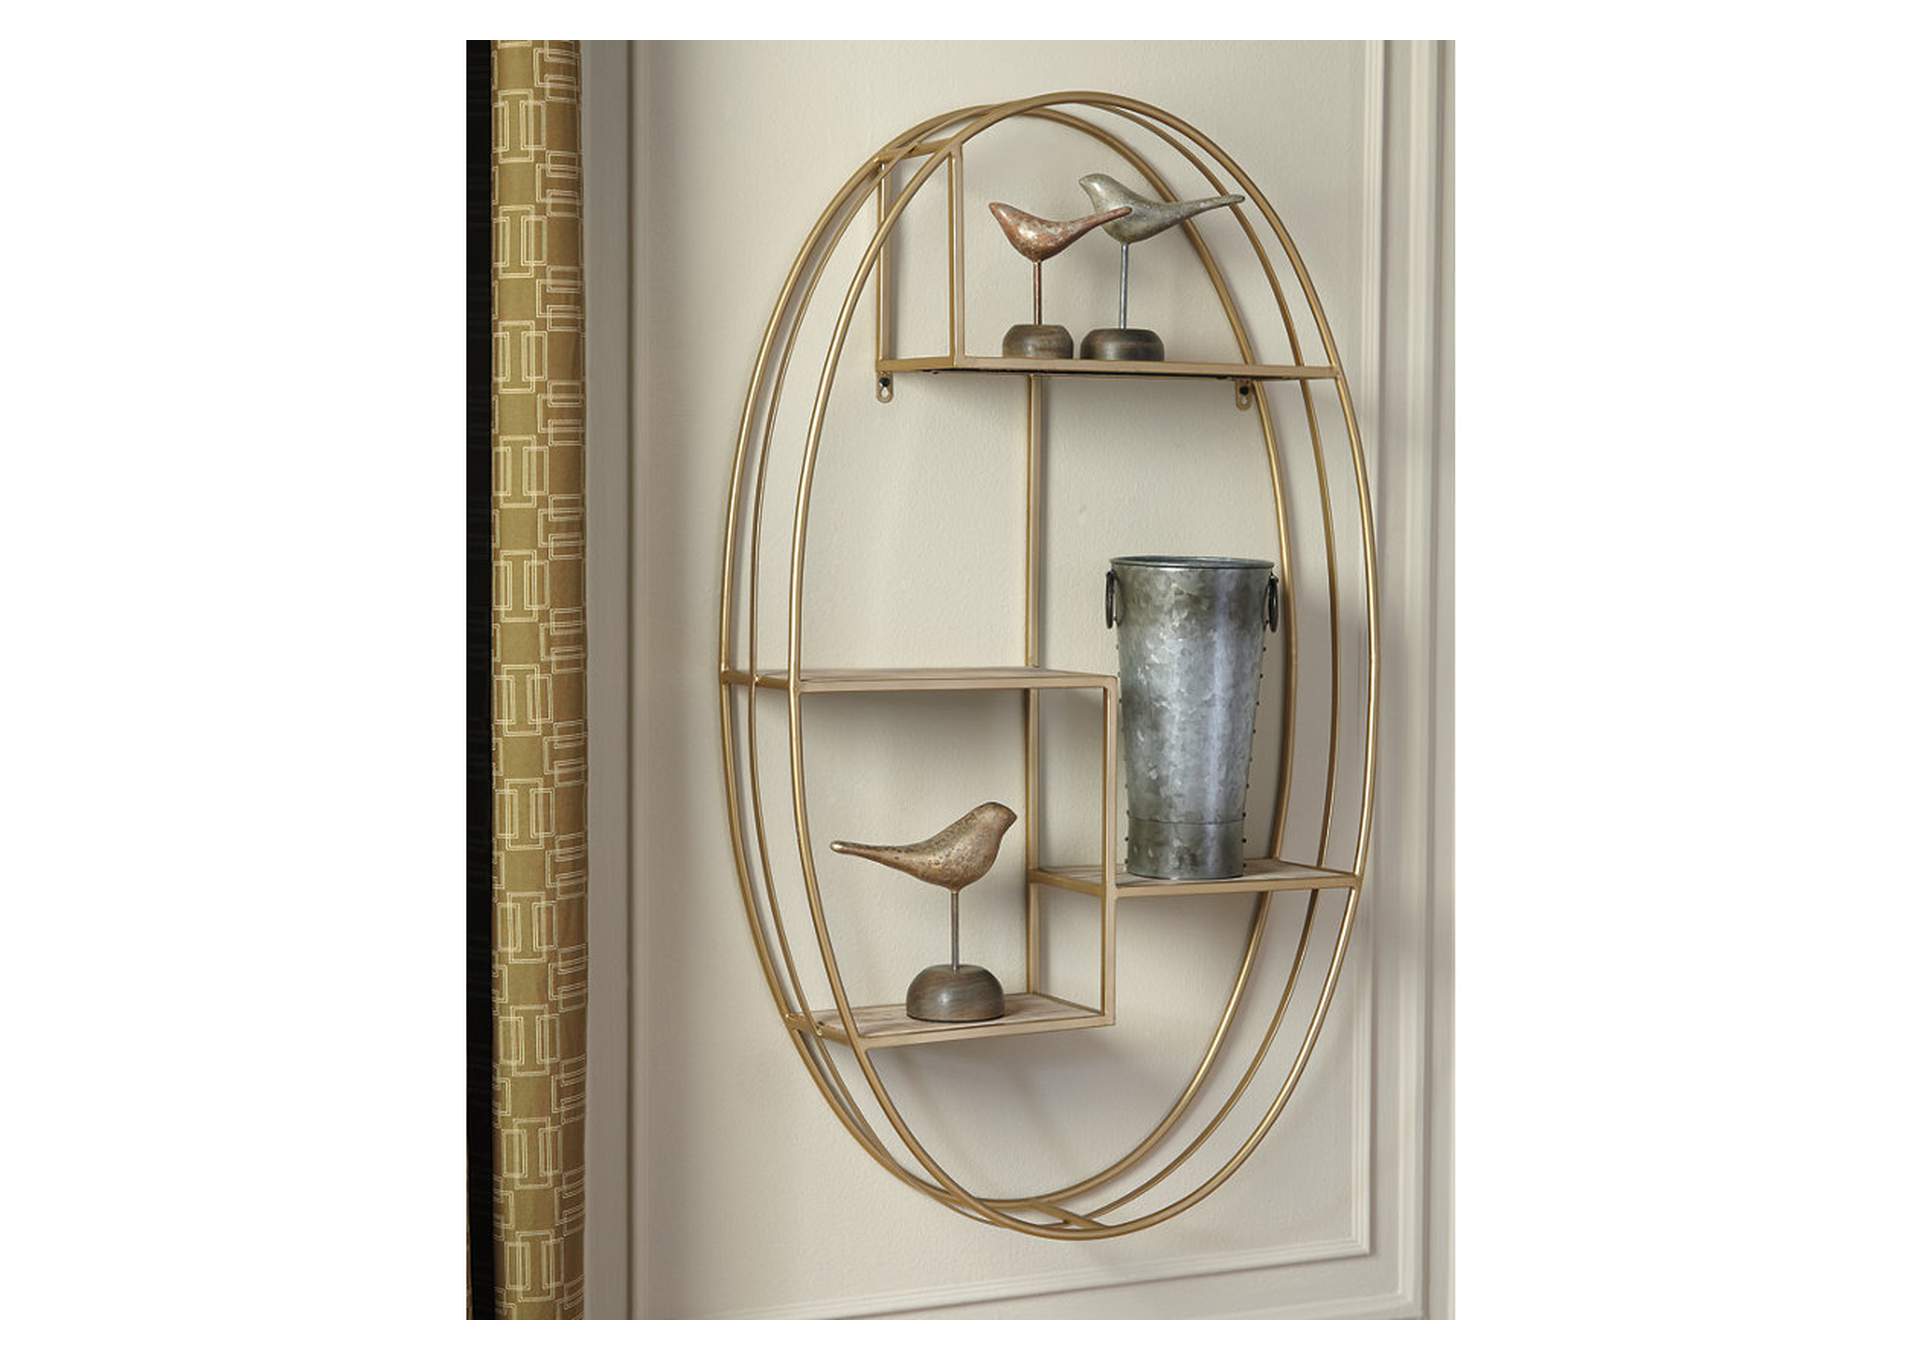 Elettra Wall Shelf,Direct To Consumer Express